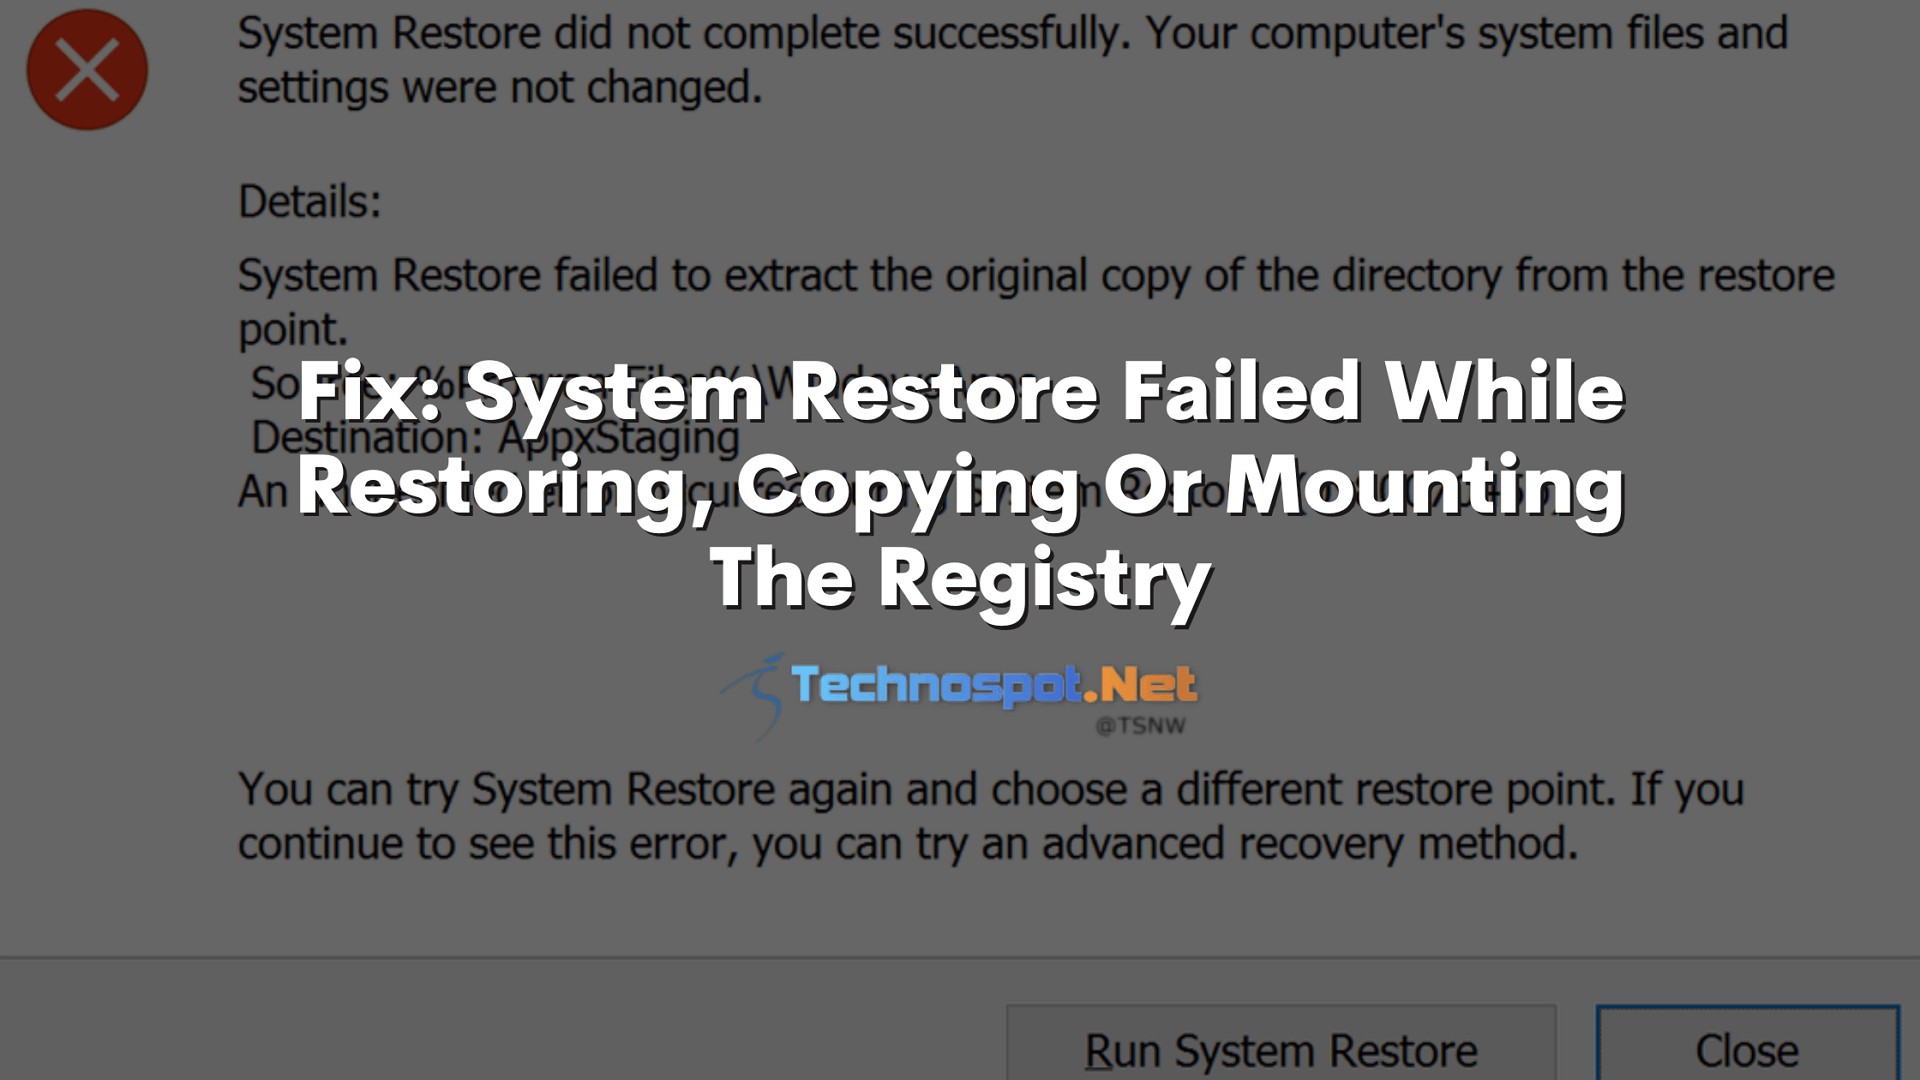 Fix System Restore Failed While Restoring, Copying Or Mounting The Registry